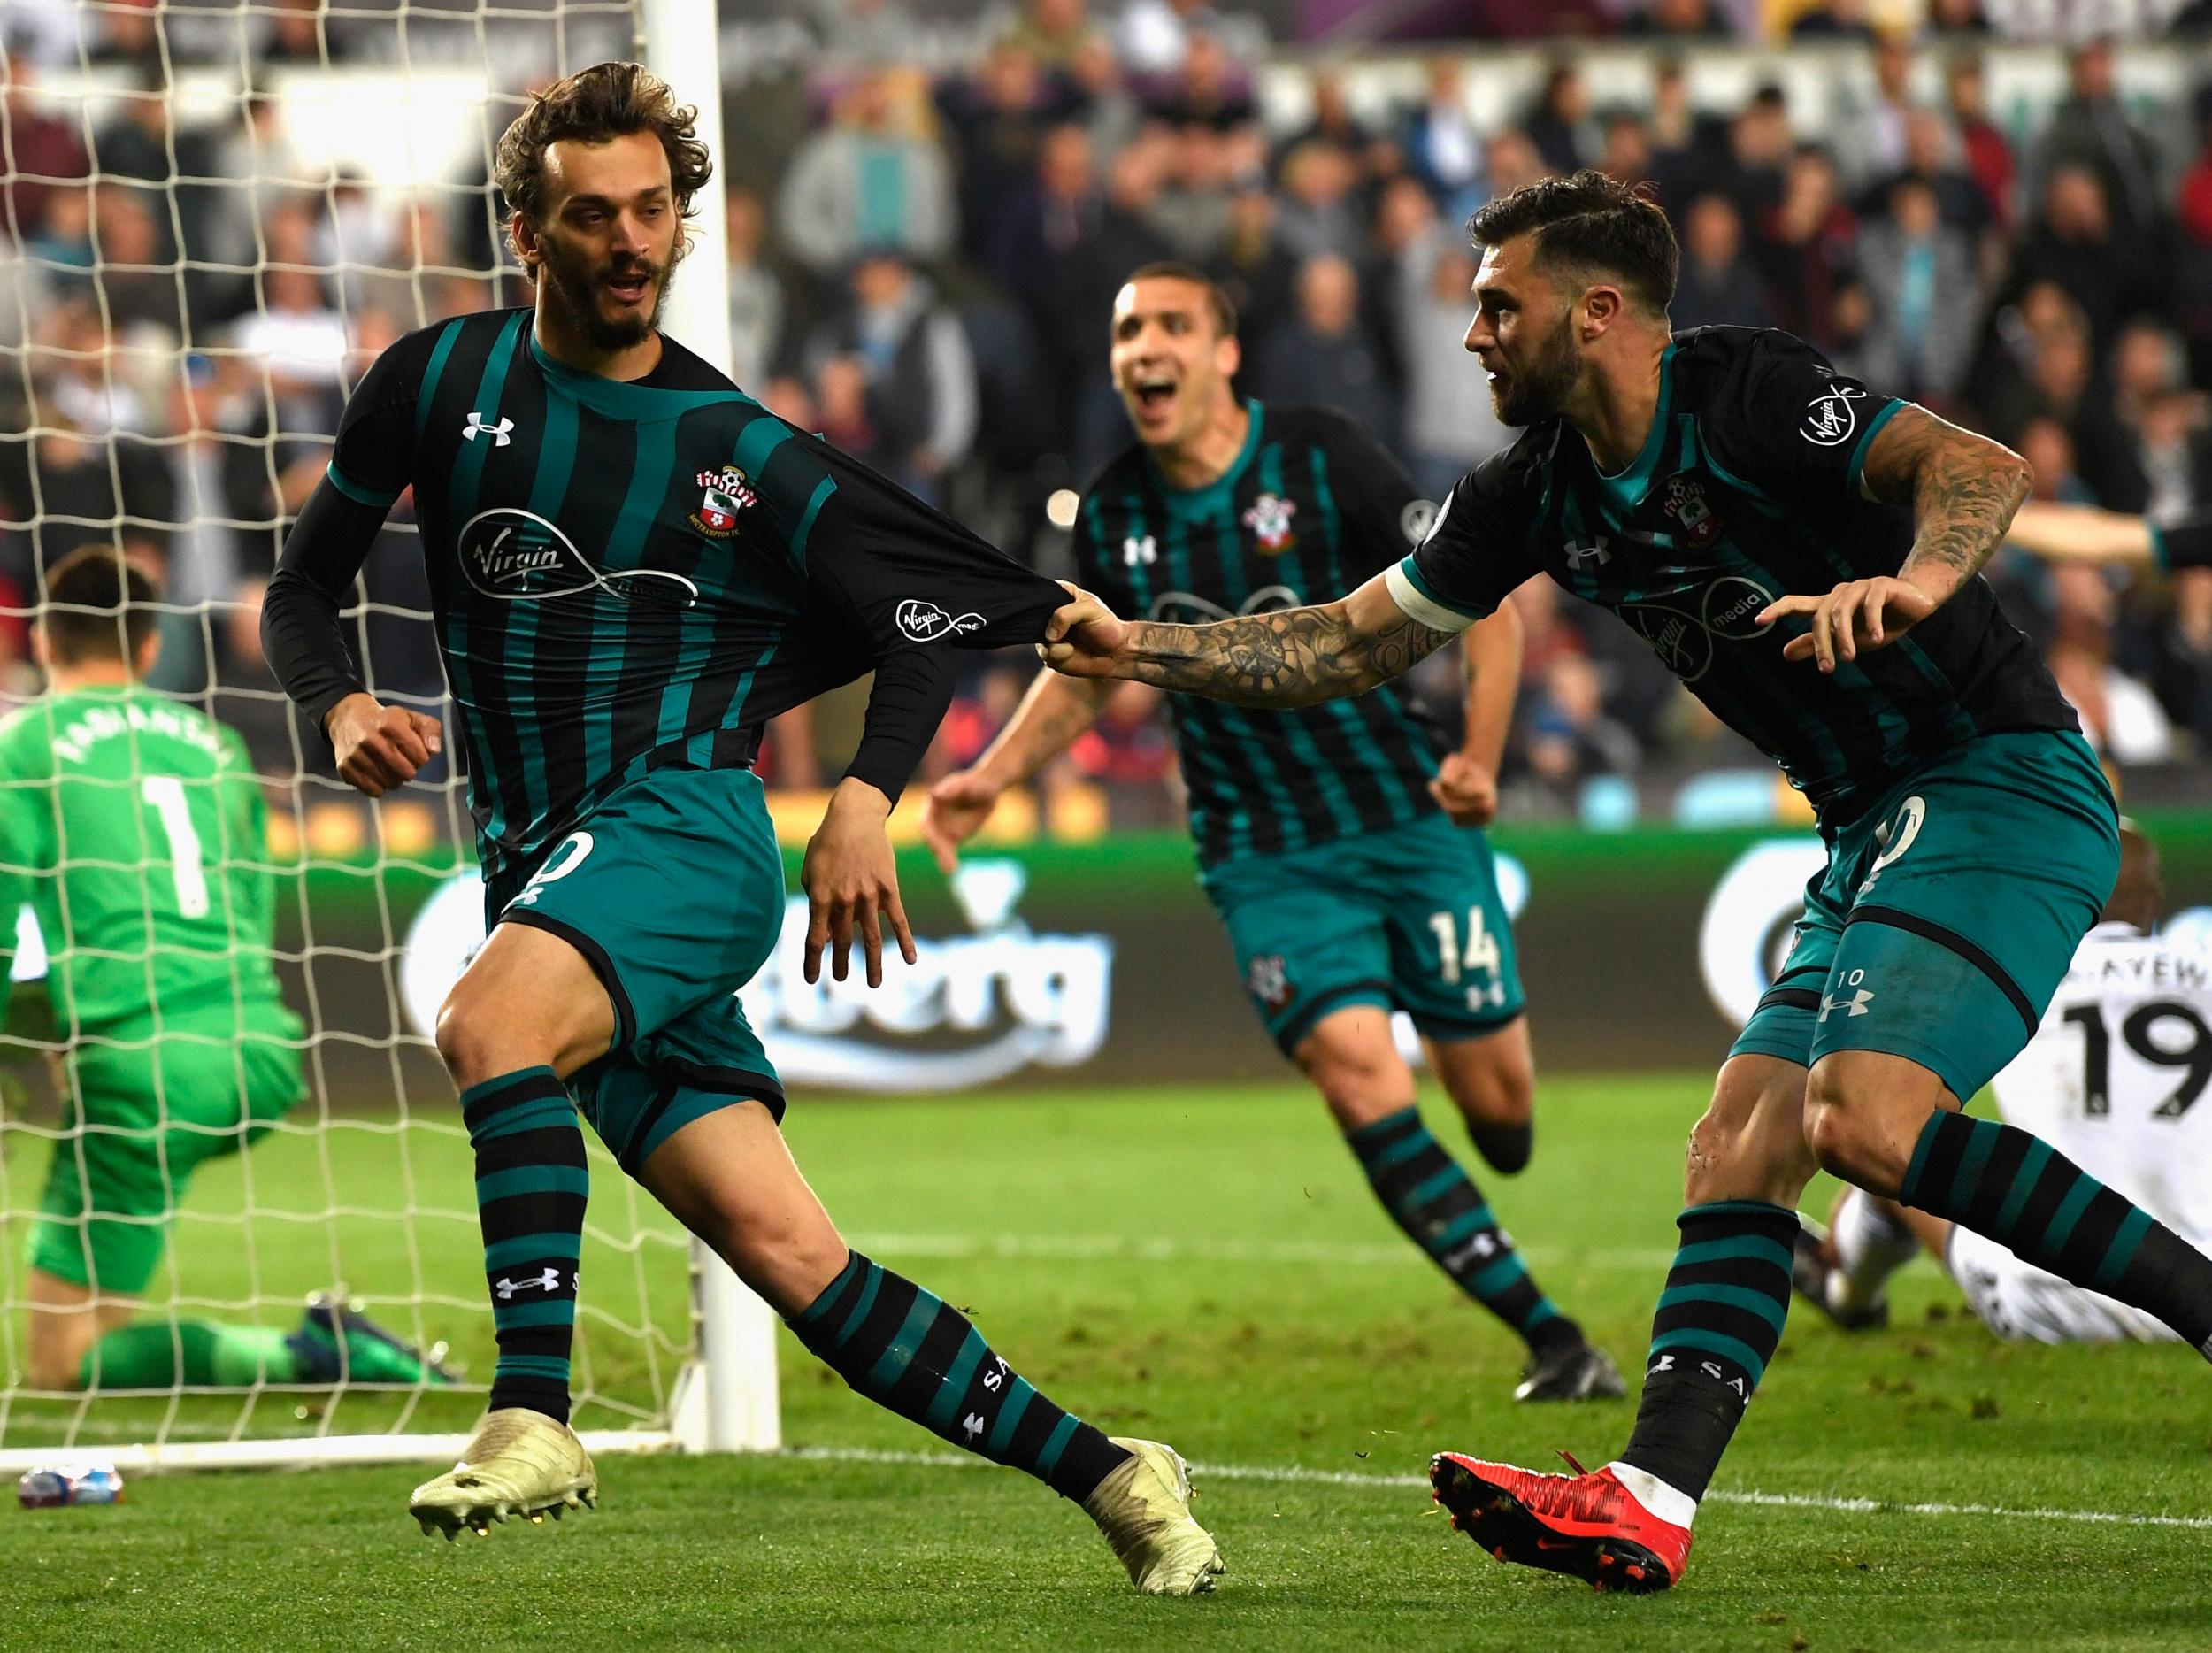 Manolo Gabbiadini scored what is likely to be a priceless goal for Southampton